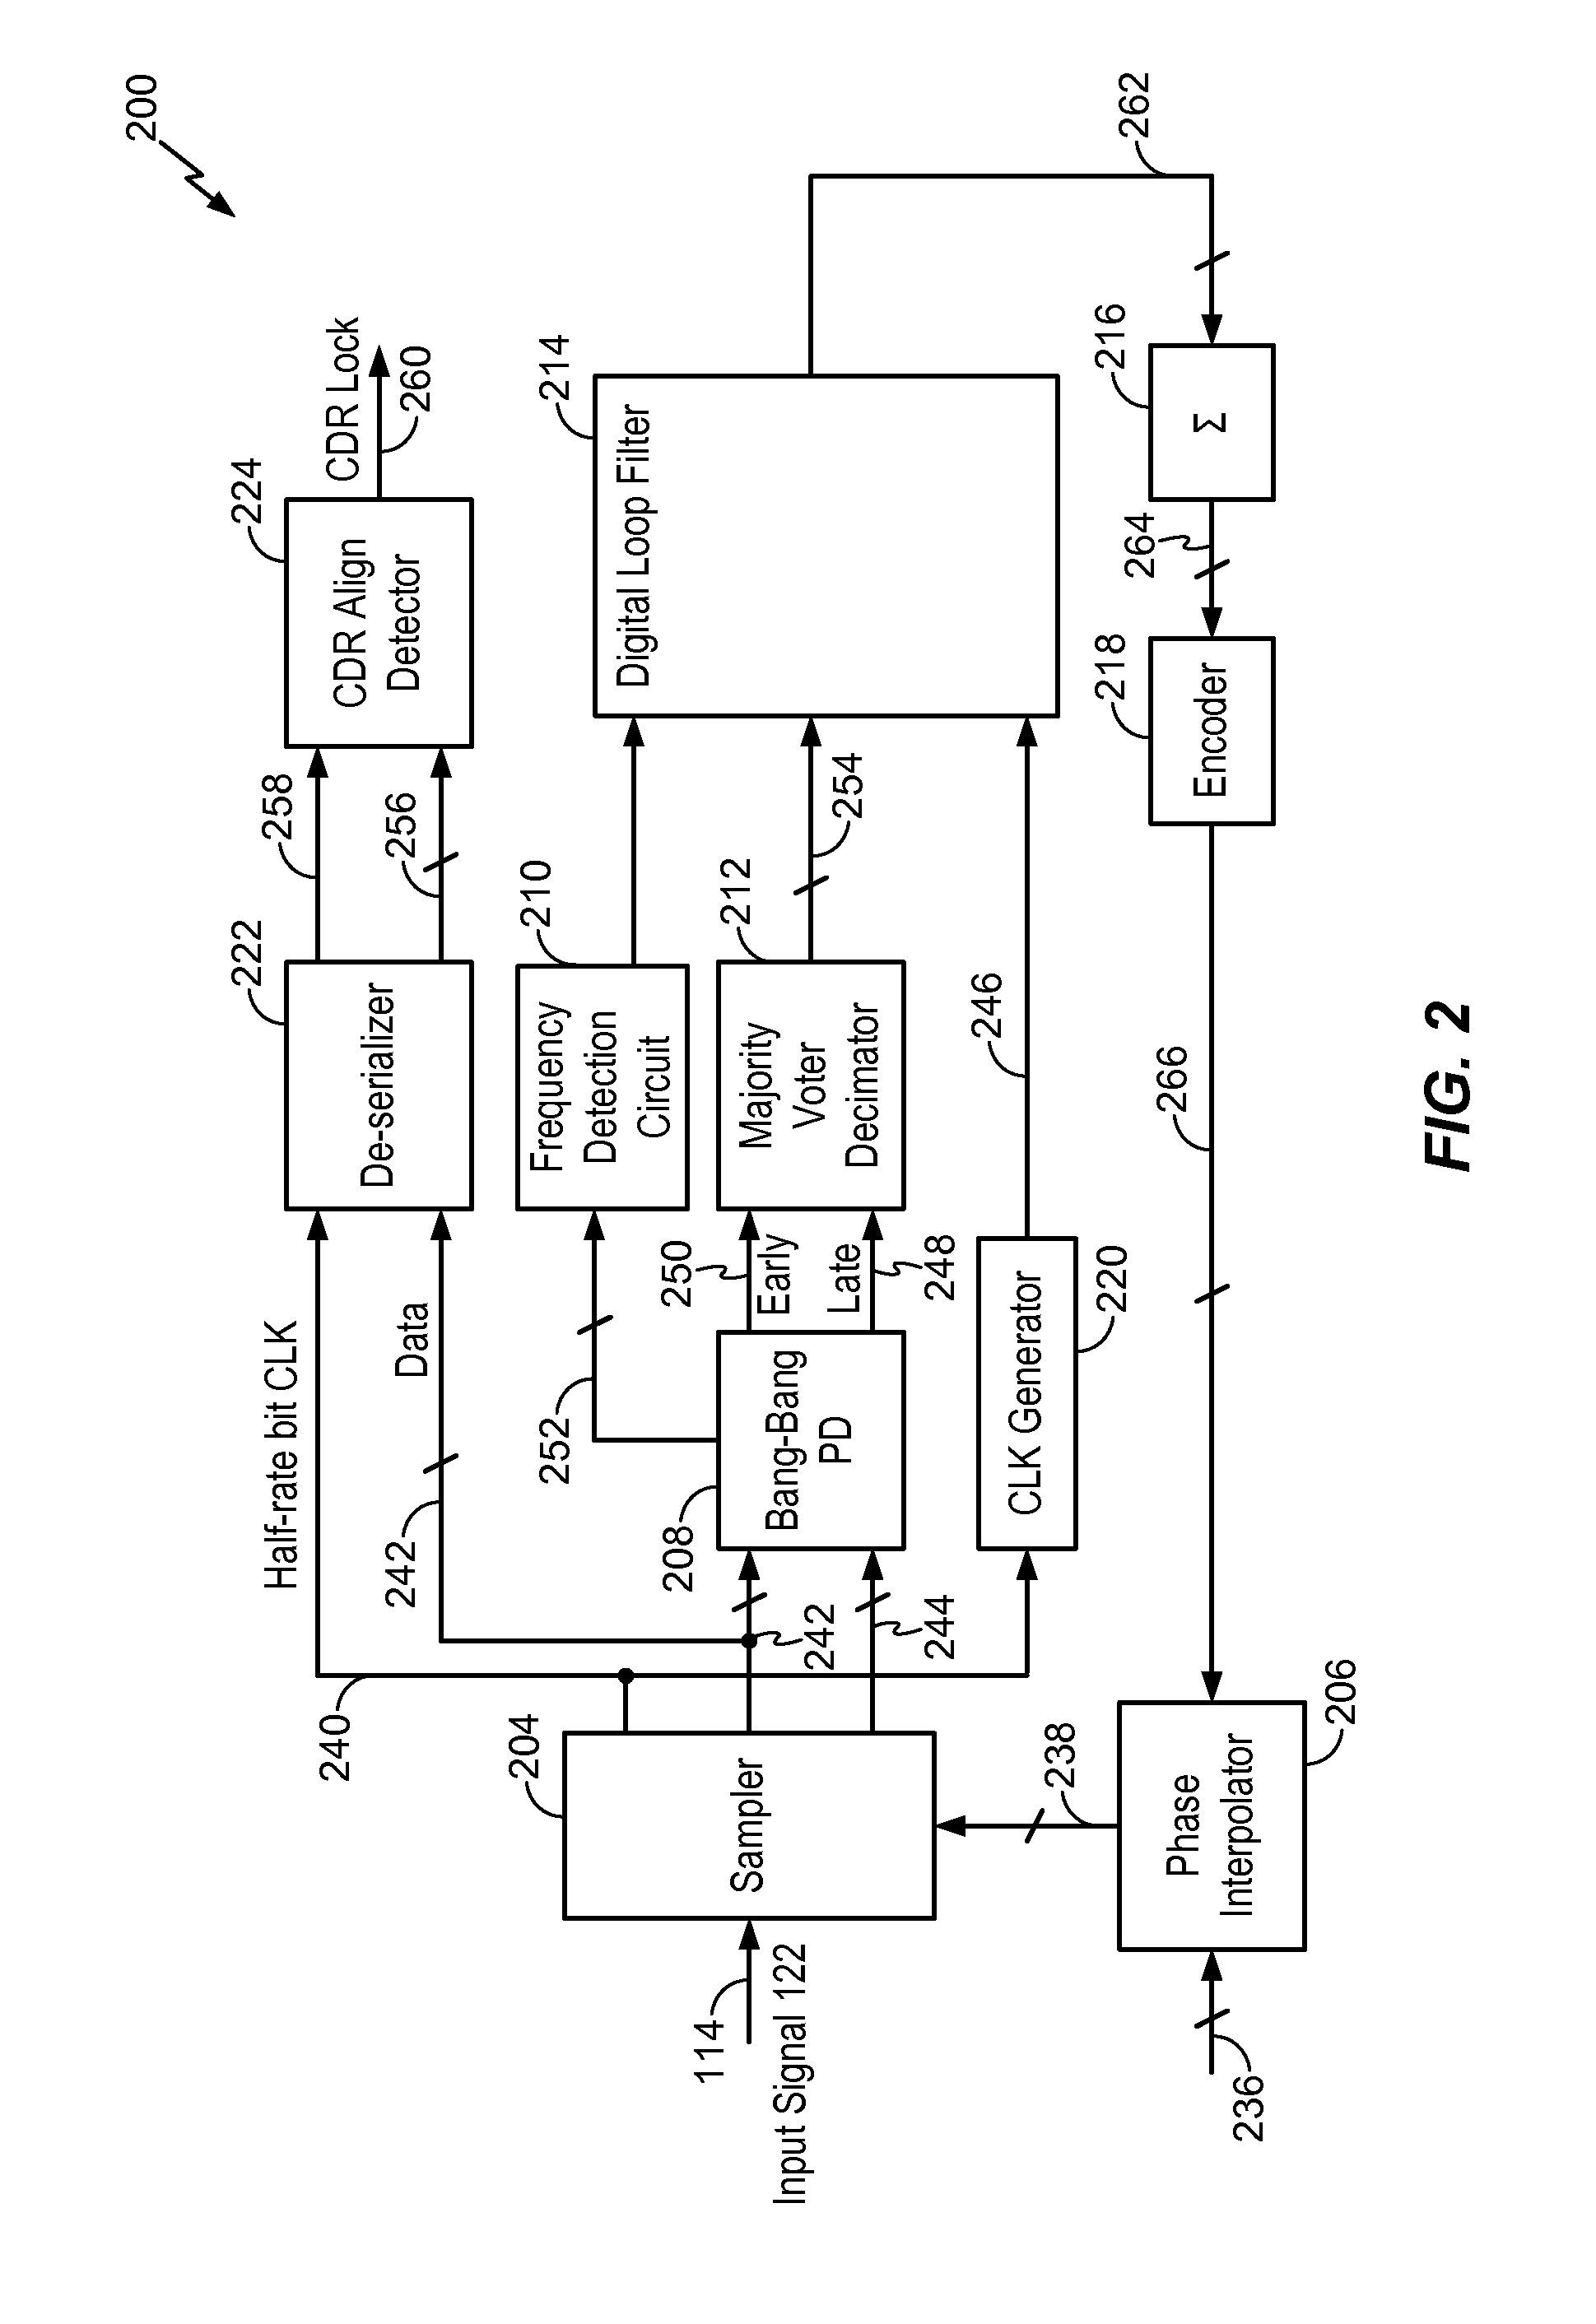 Method and Digital Circuit for Recovering a Clock and Data from an Input Signal Using a Digital Frequency Detection